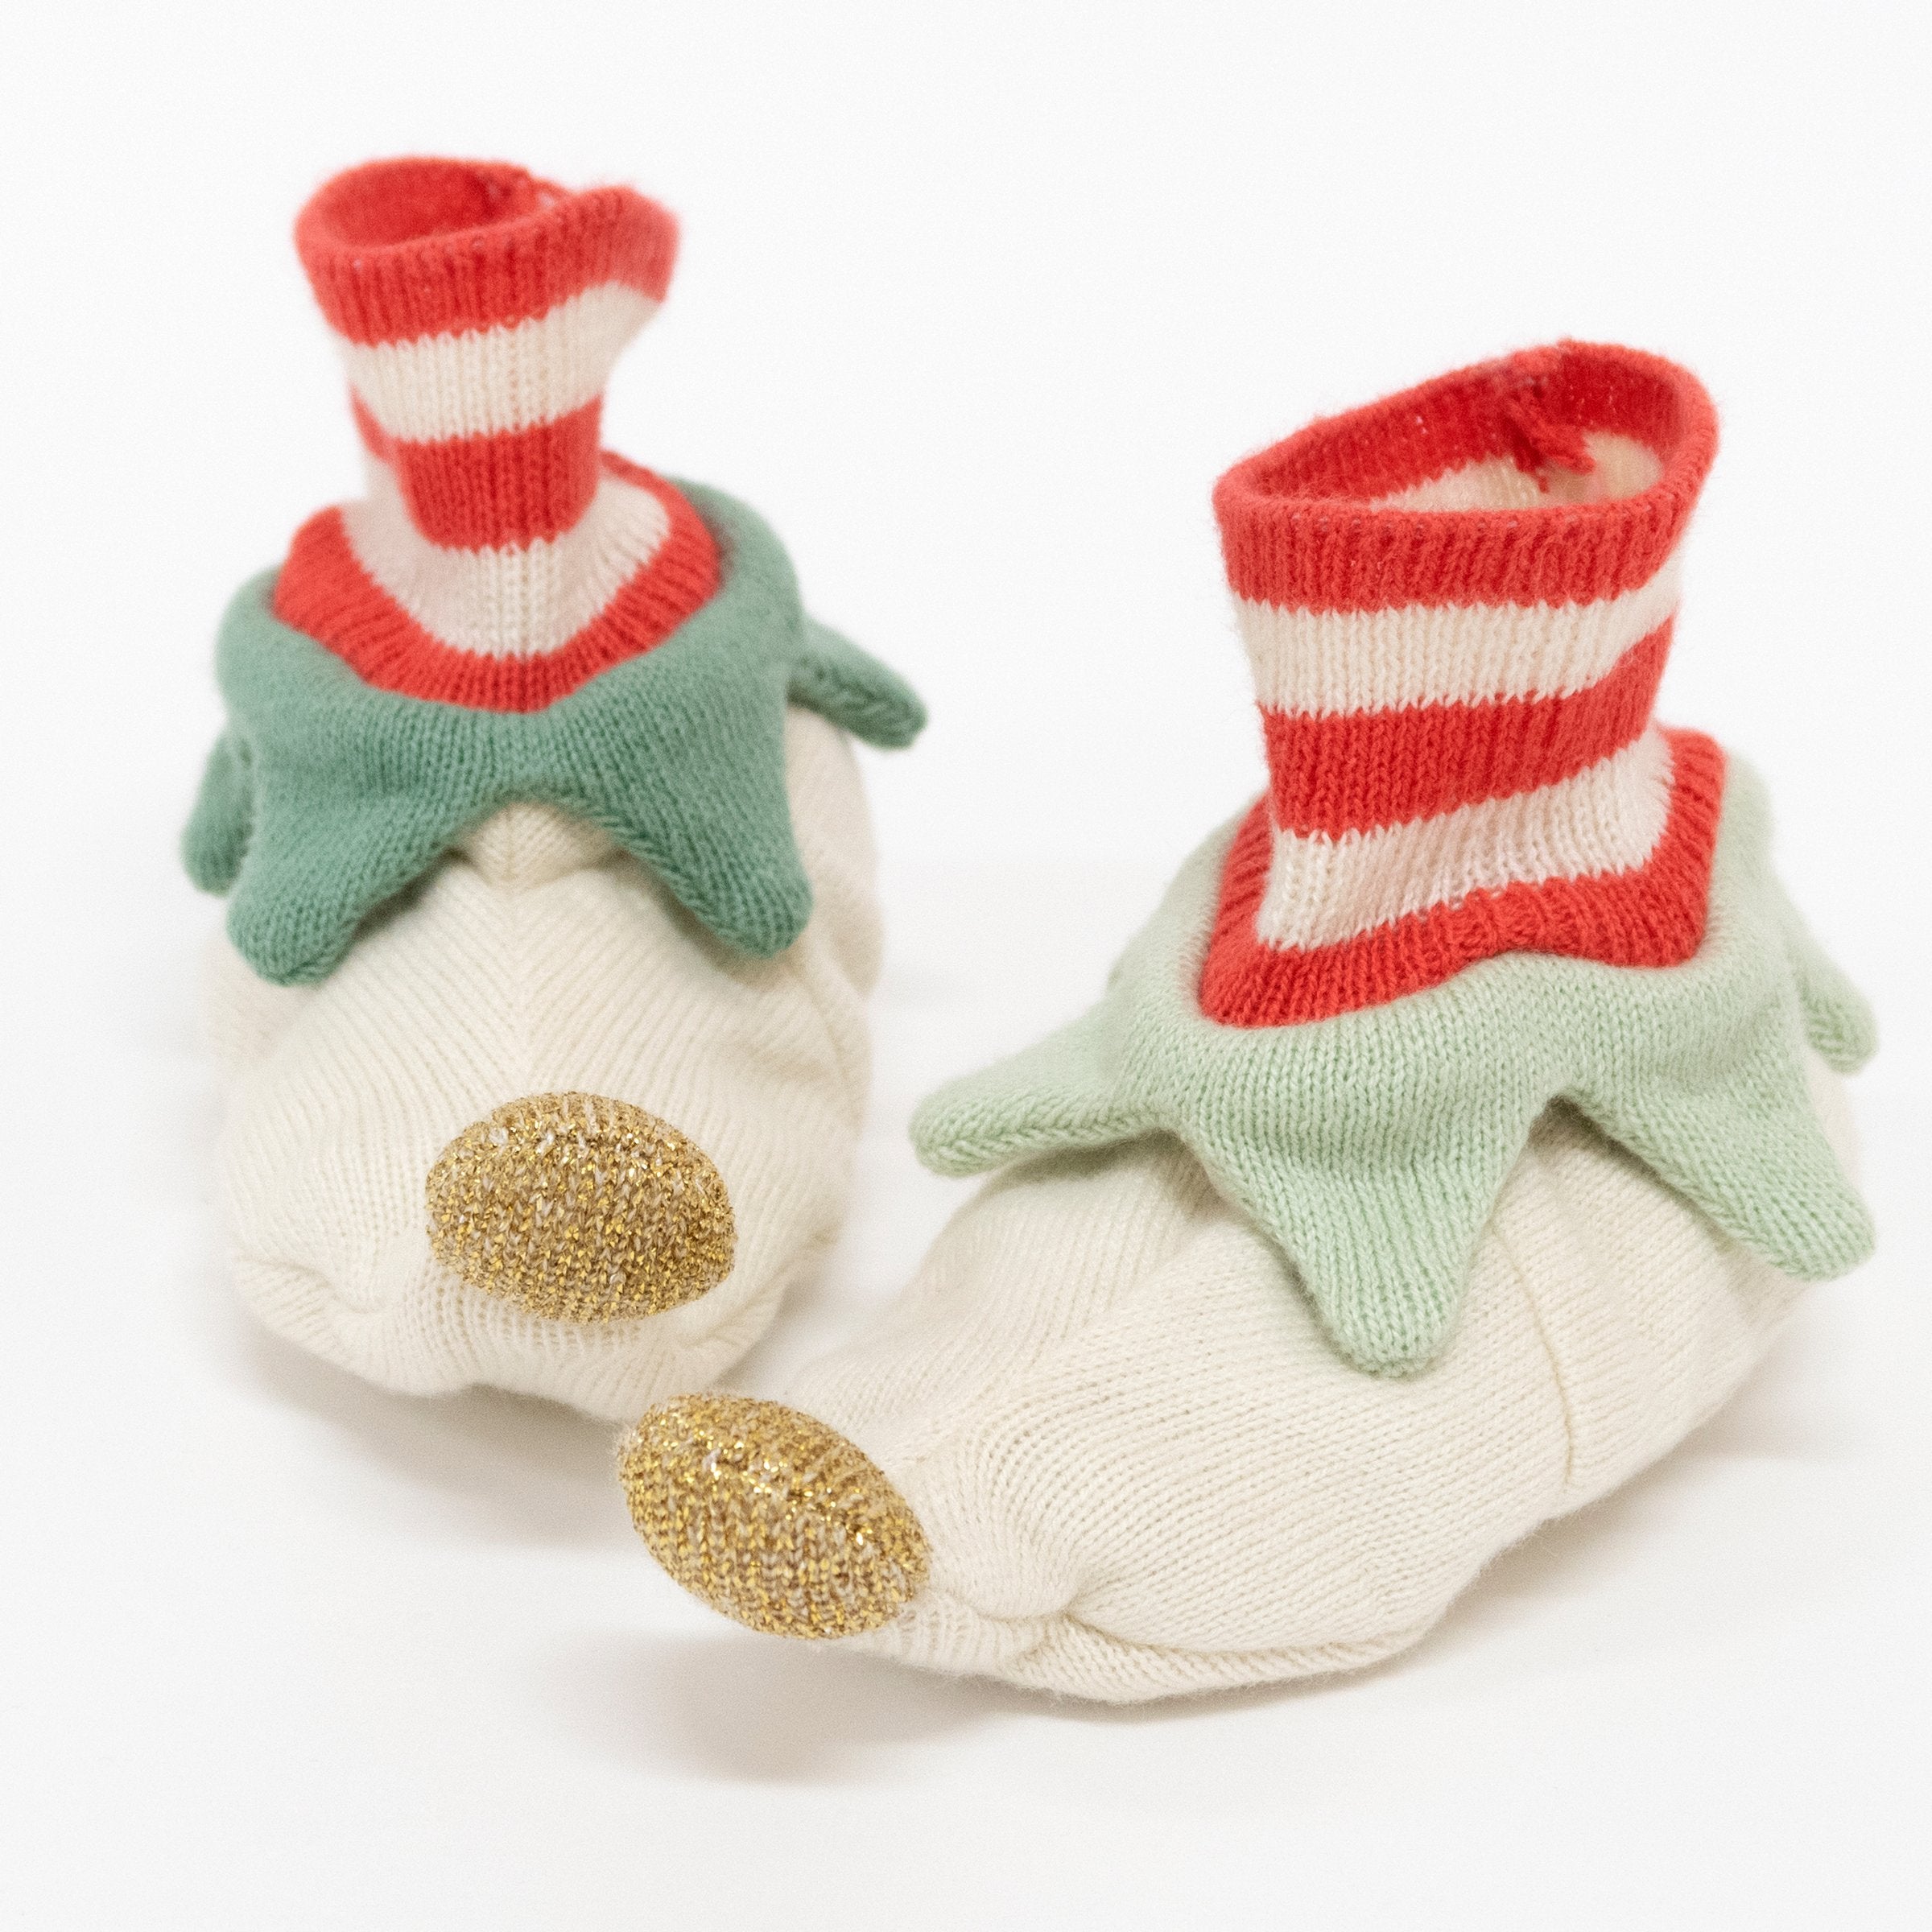 These elf baby booties make a gorgeous baby Xmas outfit.